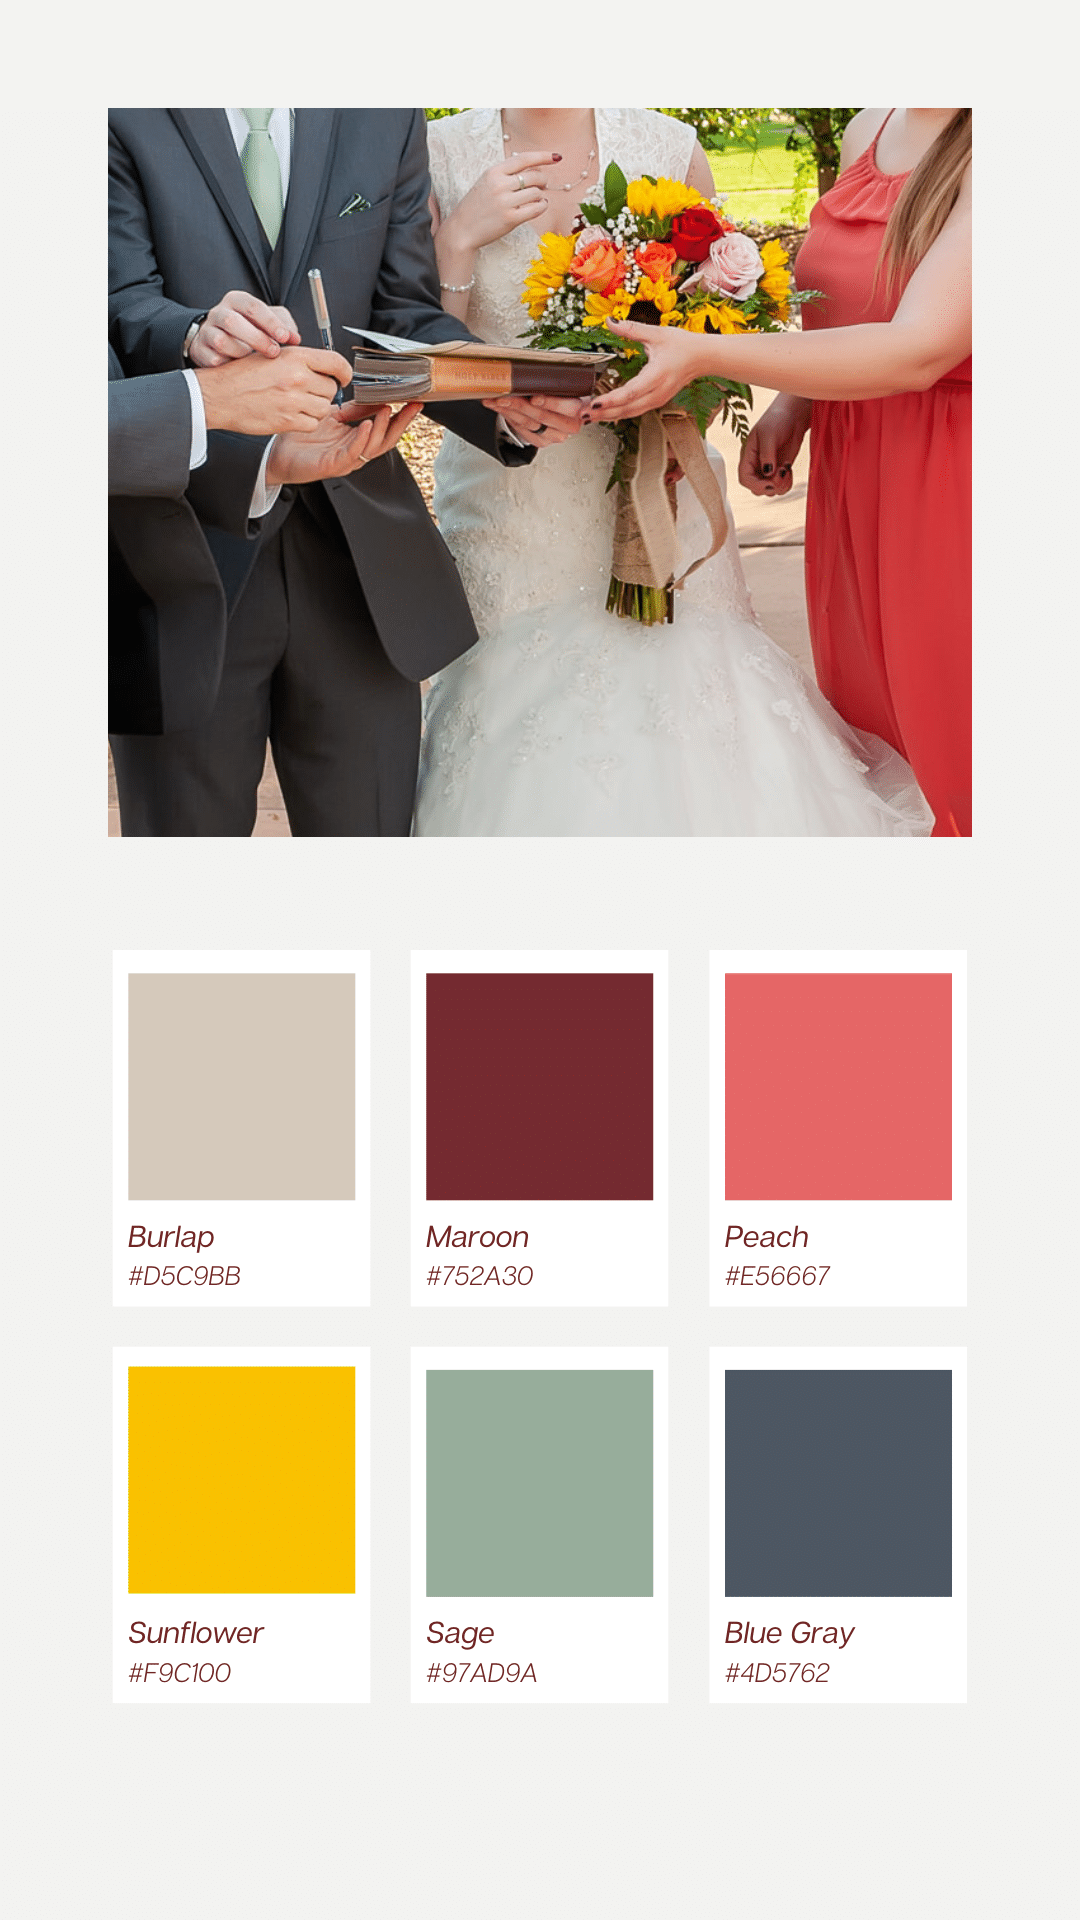 View of a bride and groom signing their marriage license. Underneath are 6 color chips from their wedding palette: Burlap, maroon, peach, sunflower, sage, and blue gray.